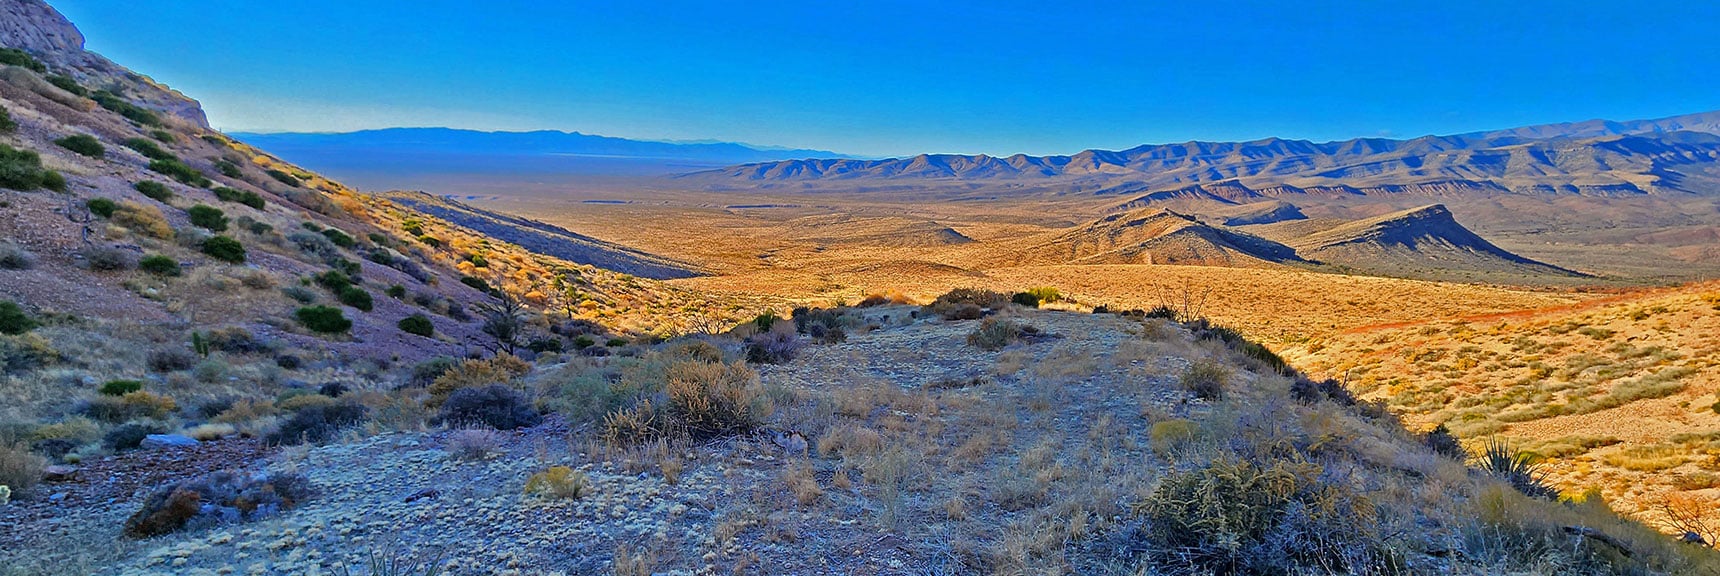 View West from Upper End of Chute Canyon Road | Landmark Bluff Summit | Lovell Canyon, Nevada